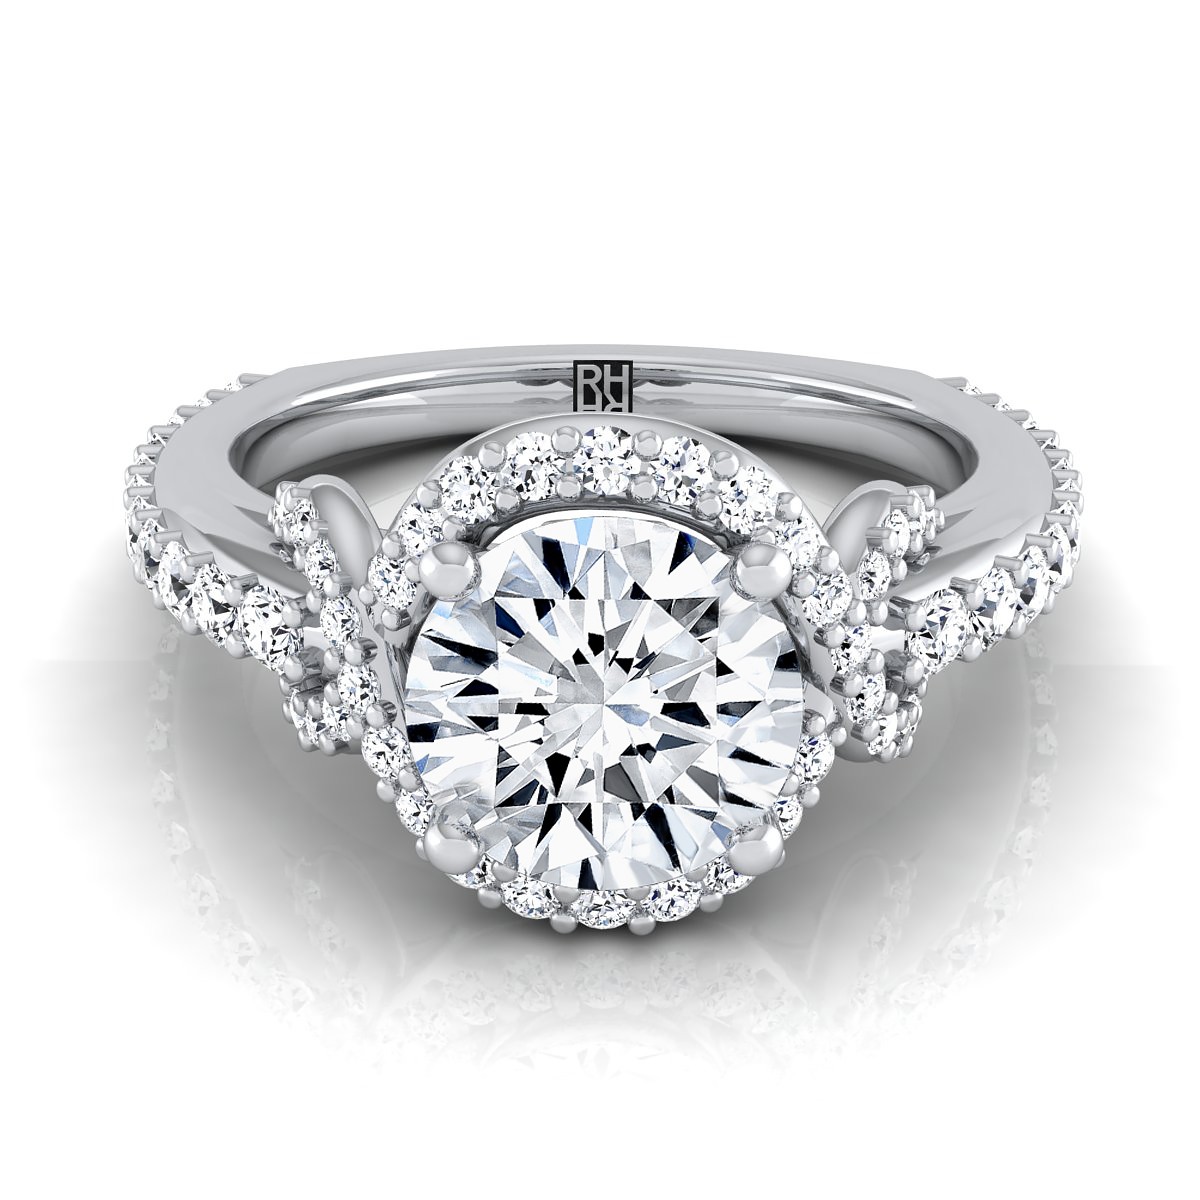 Types of Jewelry Settings to Enhance Diamond Color (That Actually Work)